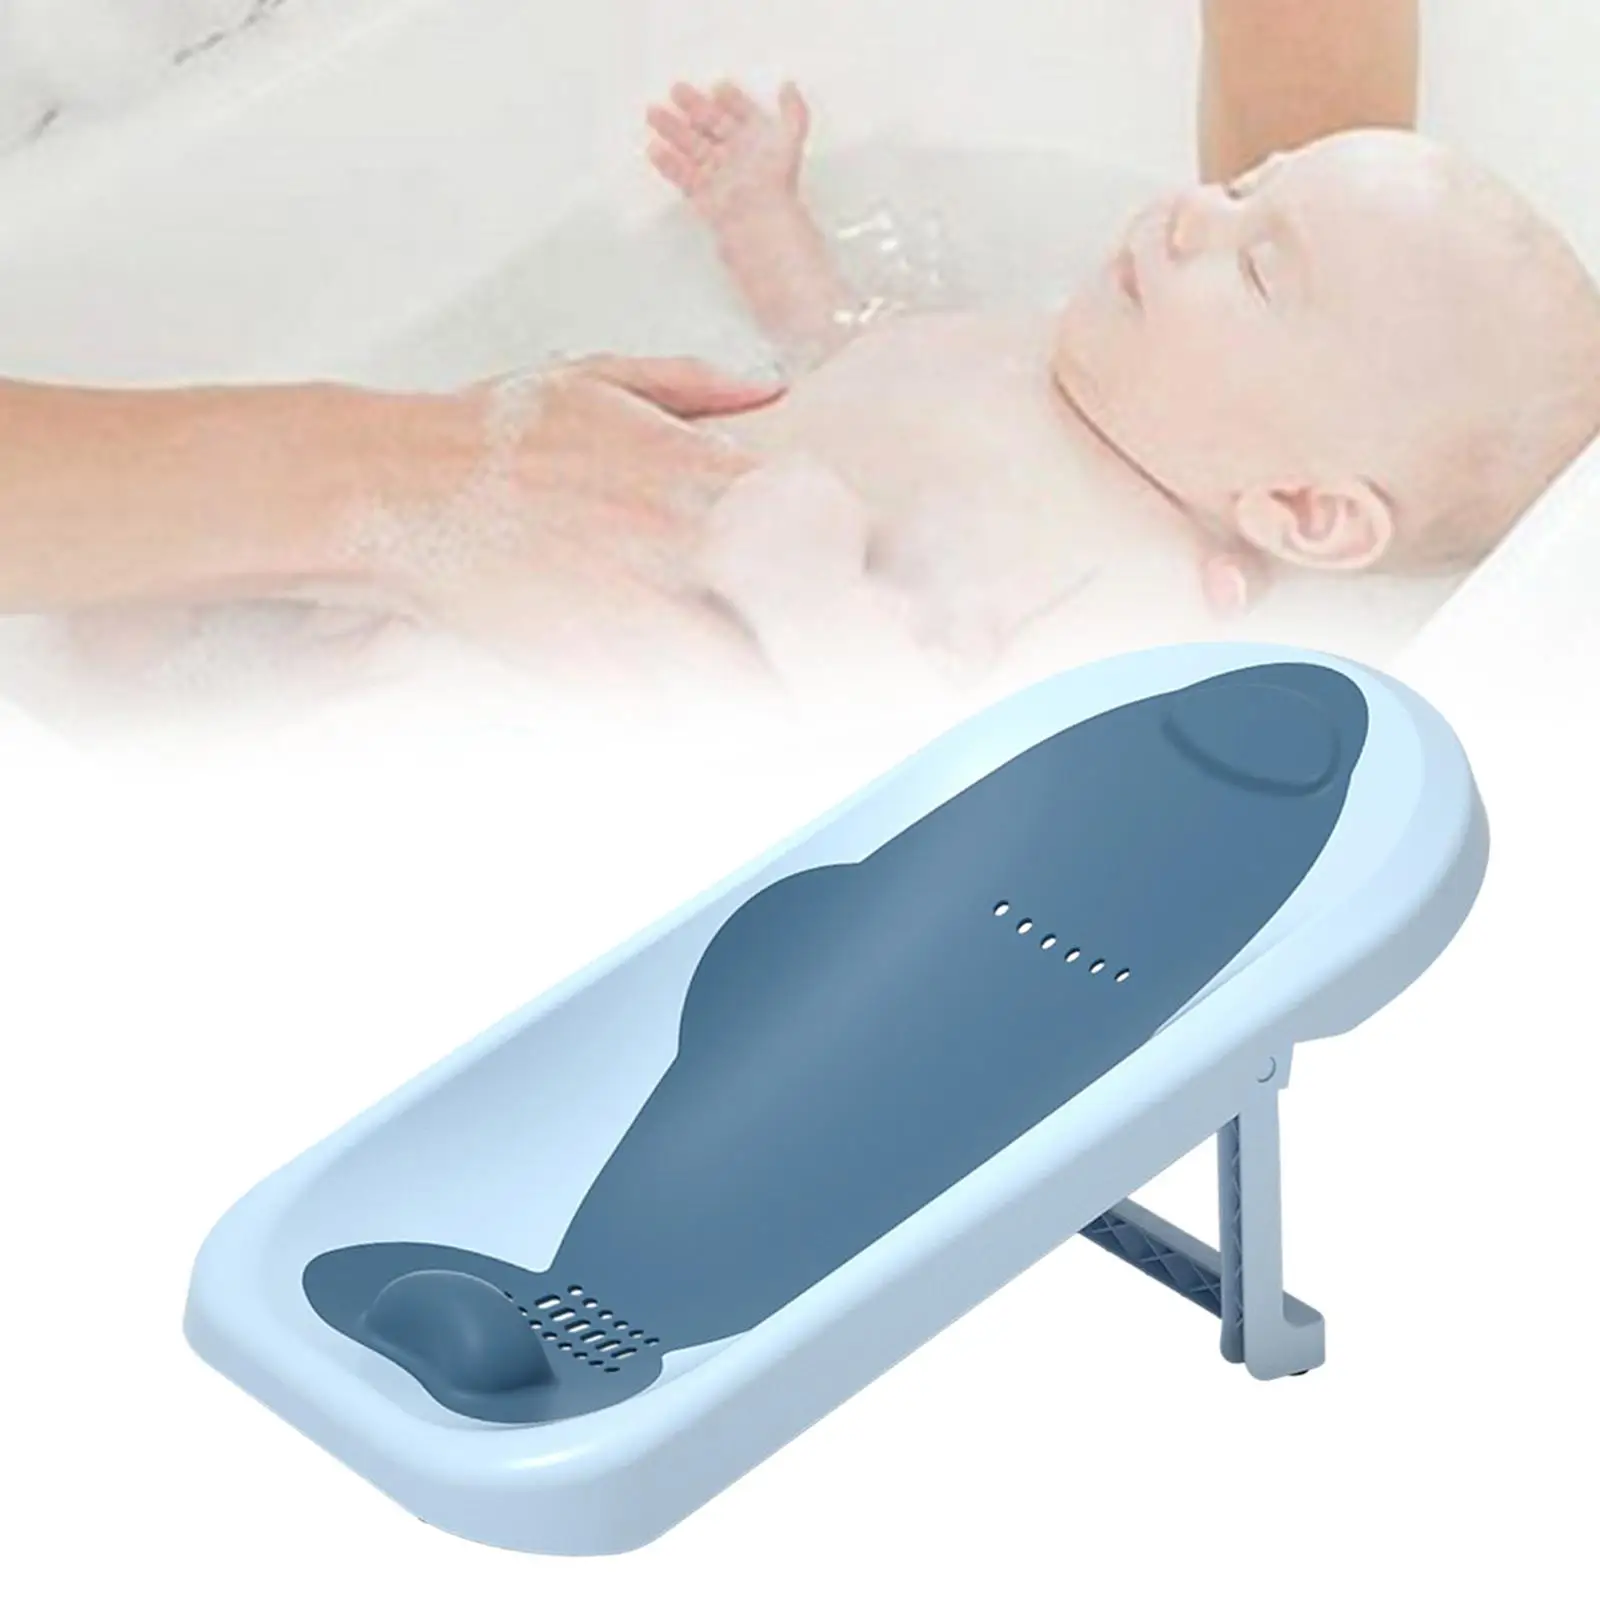 bath Seat Support Rack Use from Birth until Sitting up kids Infant